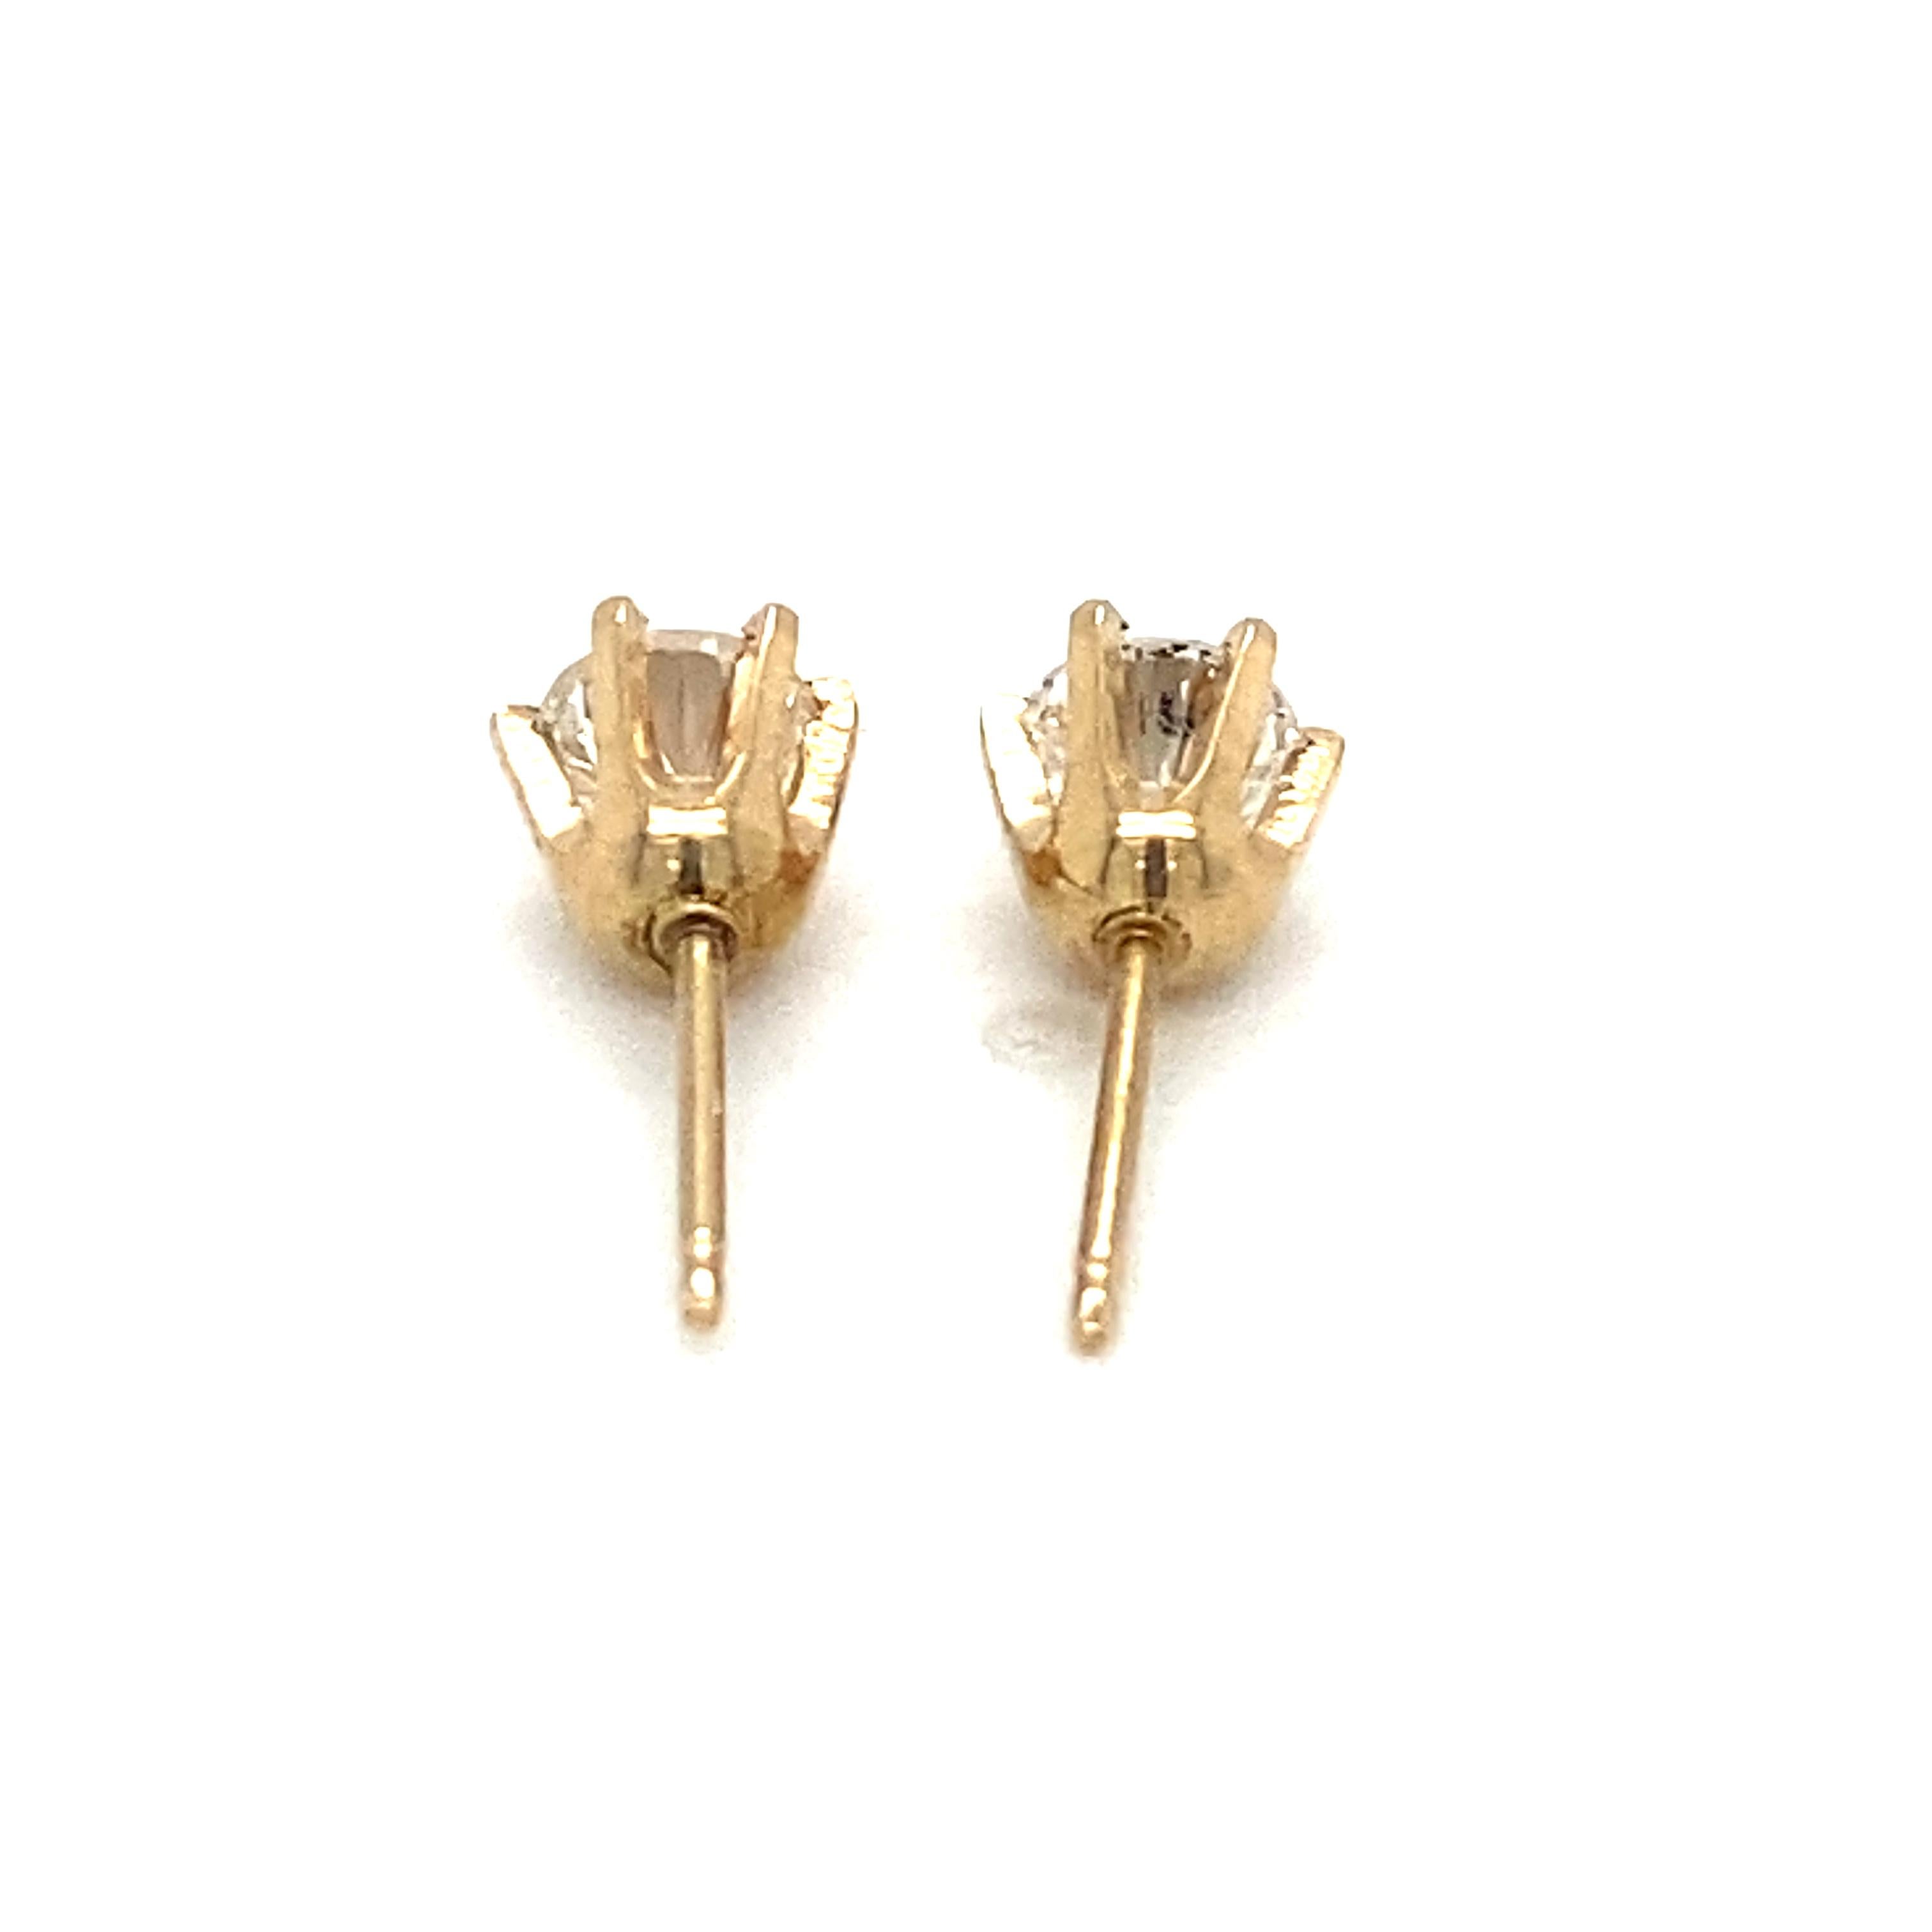 Item Details: These stud earrings have round diamonds at over half a carat total weight. They are perfect for wearing everyday, and make a great gift as well!

Circa: 2000s
Metal Type: 14 Karat Yellow Gold
Weight: 1.0 grams

Diamond Details:

Carat: